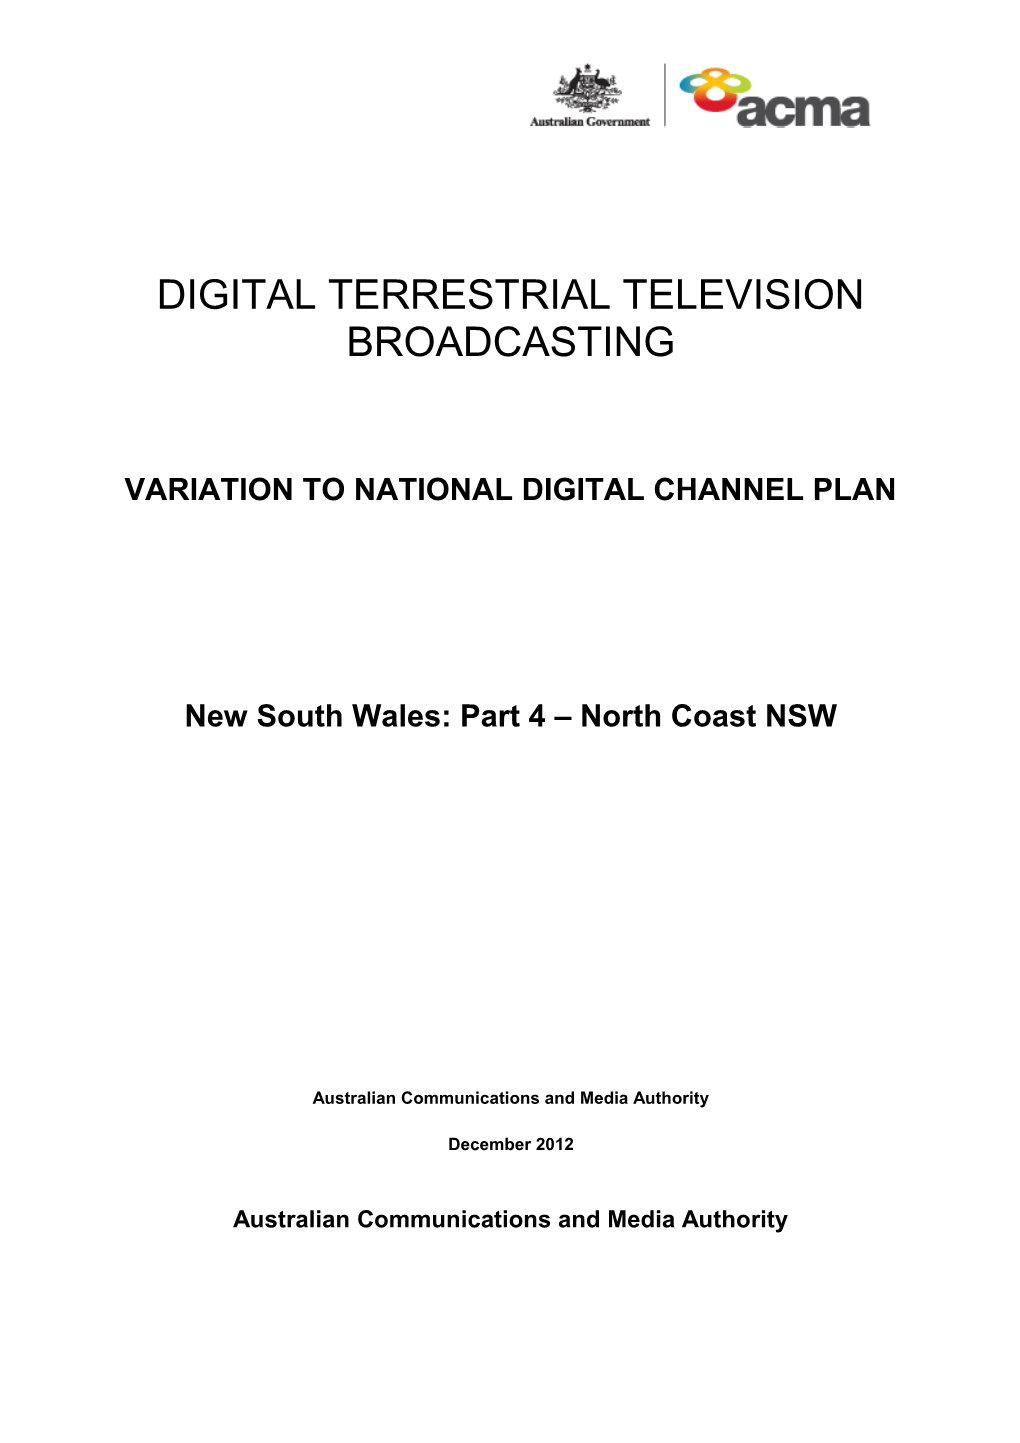 DTTB Variation to National Digital Channel Plan Part 4 North Coast NSW